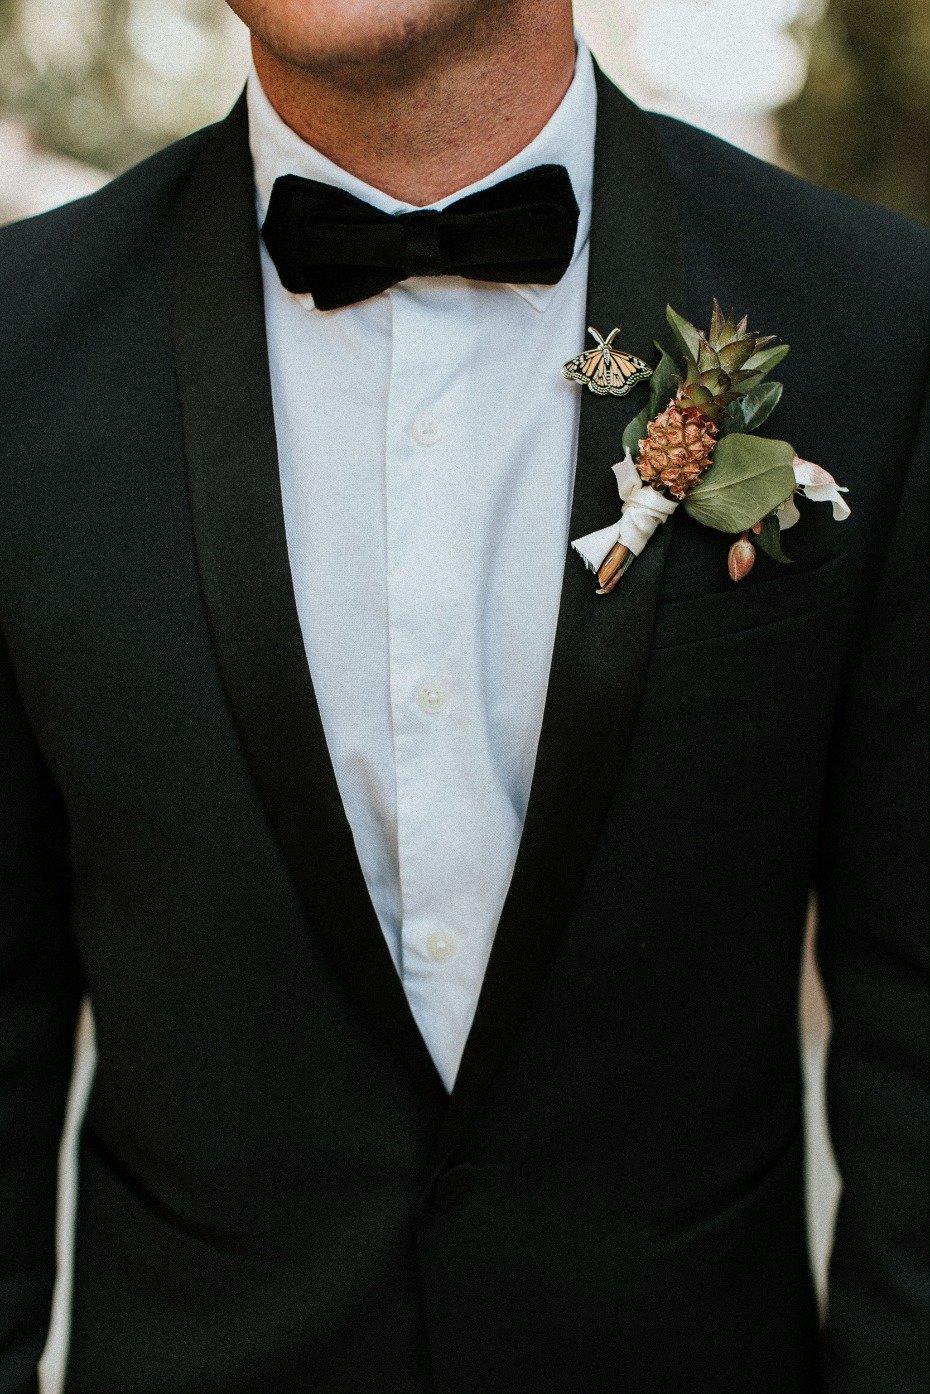 Pineapple boutonniere